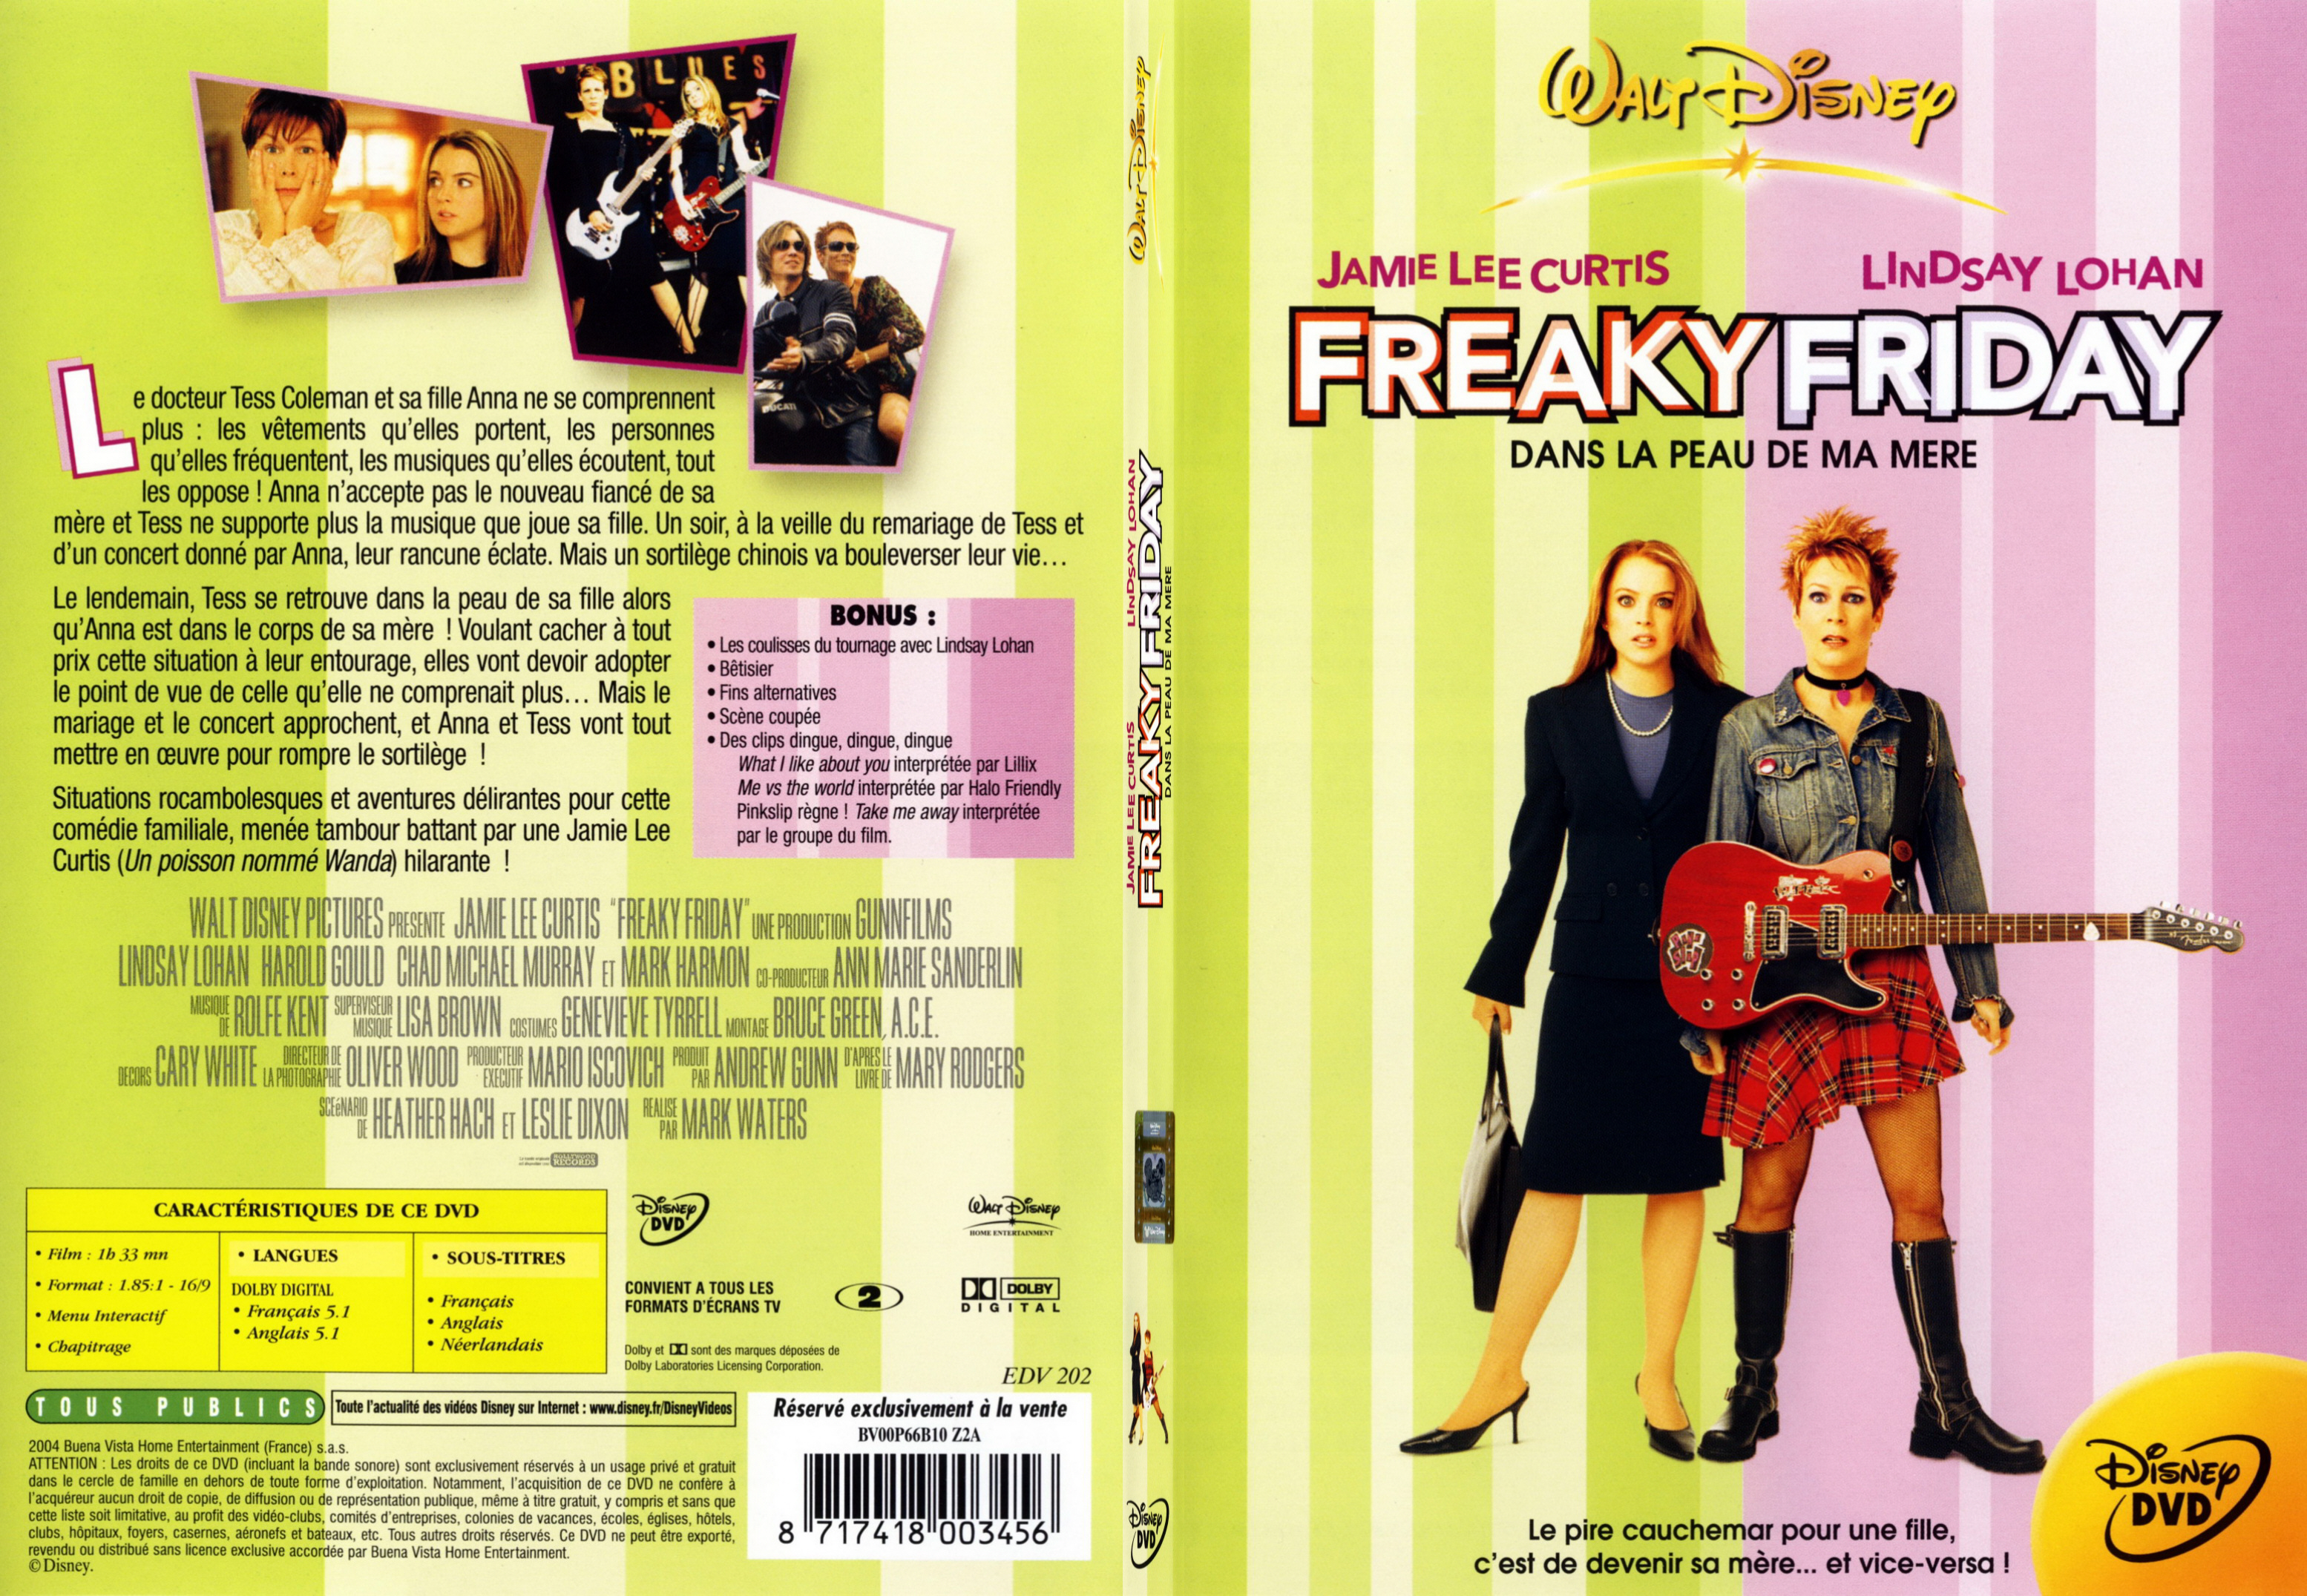 Jaquette DVD Freaky friday - SLIM